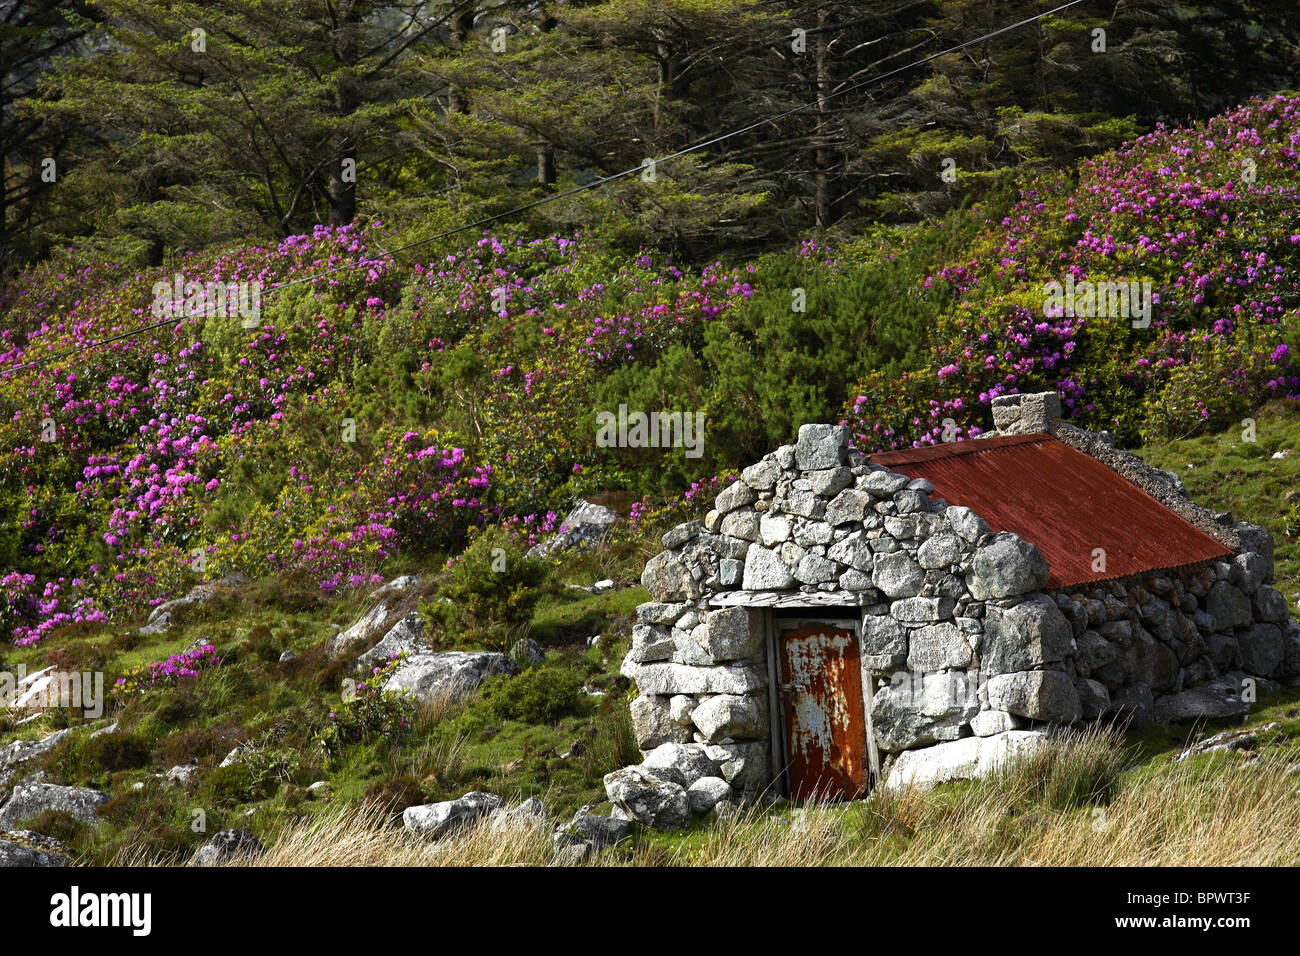 Rhododendron Flowers ( Rhododendron ponticum ) Landscape Stone Sheep Stable, Connemara County Galway Ireland Stock Photo